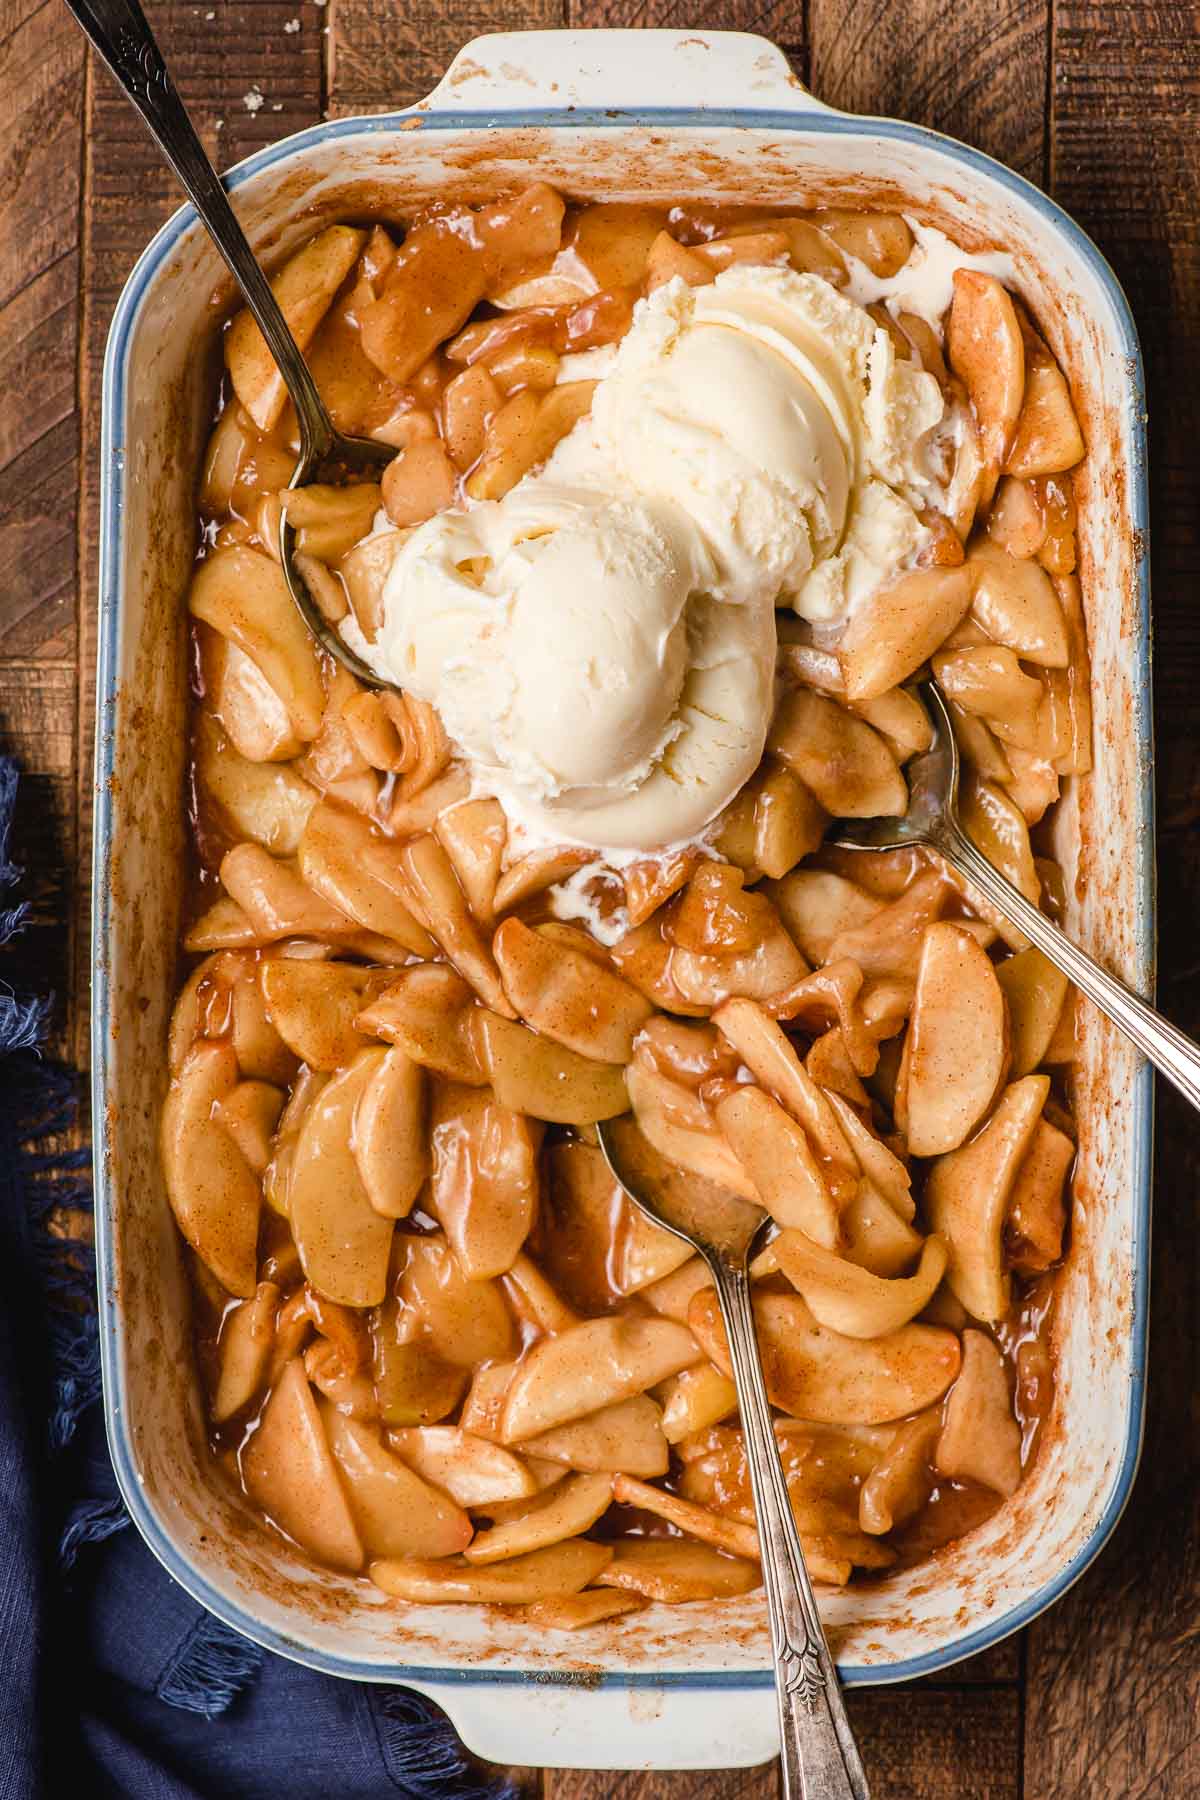 Casserole dish full of baked apples with three spoons and two scoops of ice cream on top.